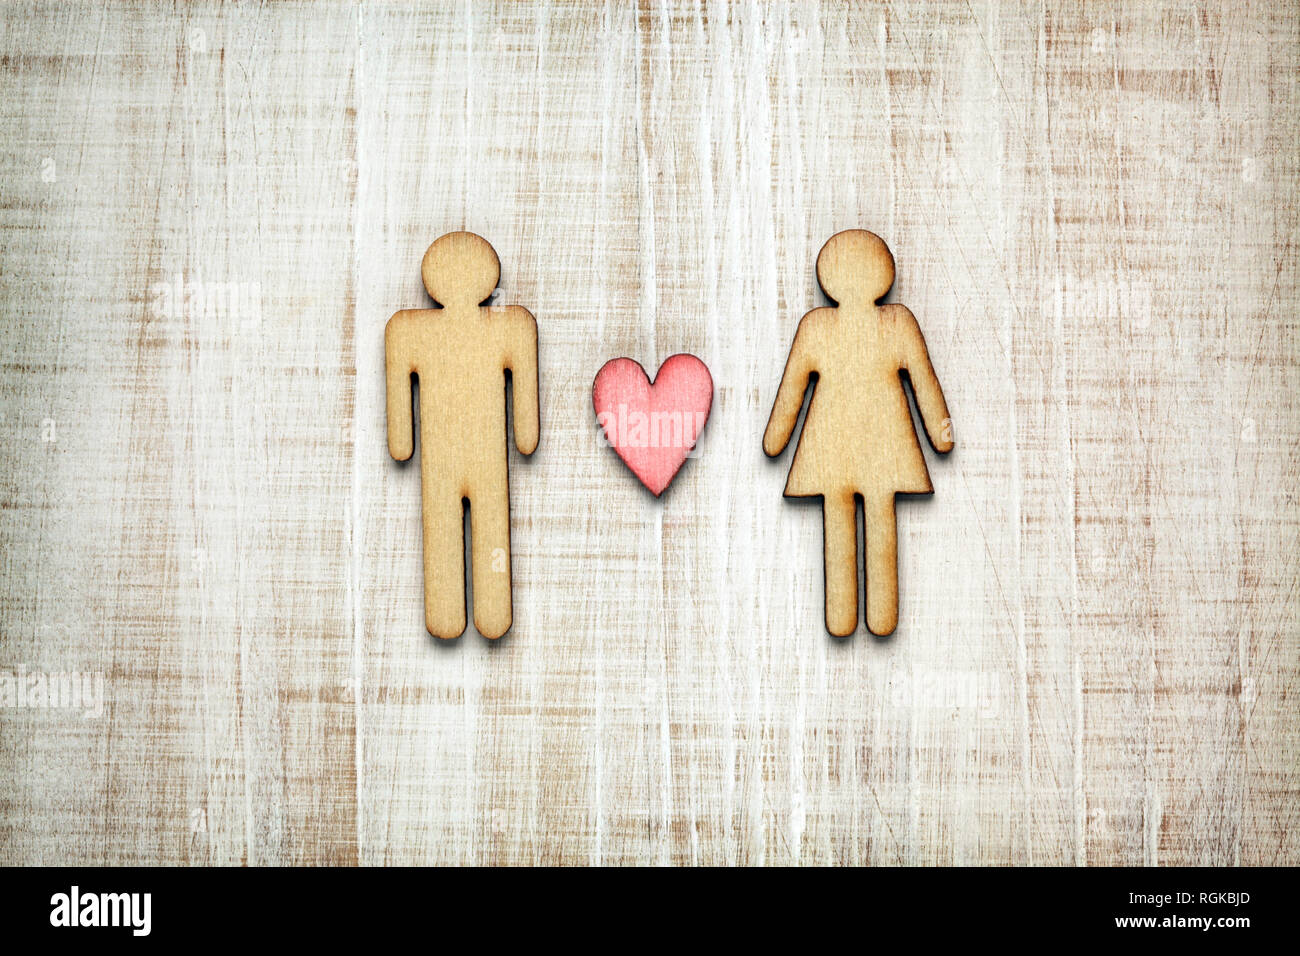 Man and woman shape with heart  on wooden background Stock Photo